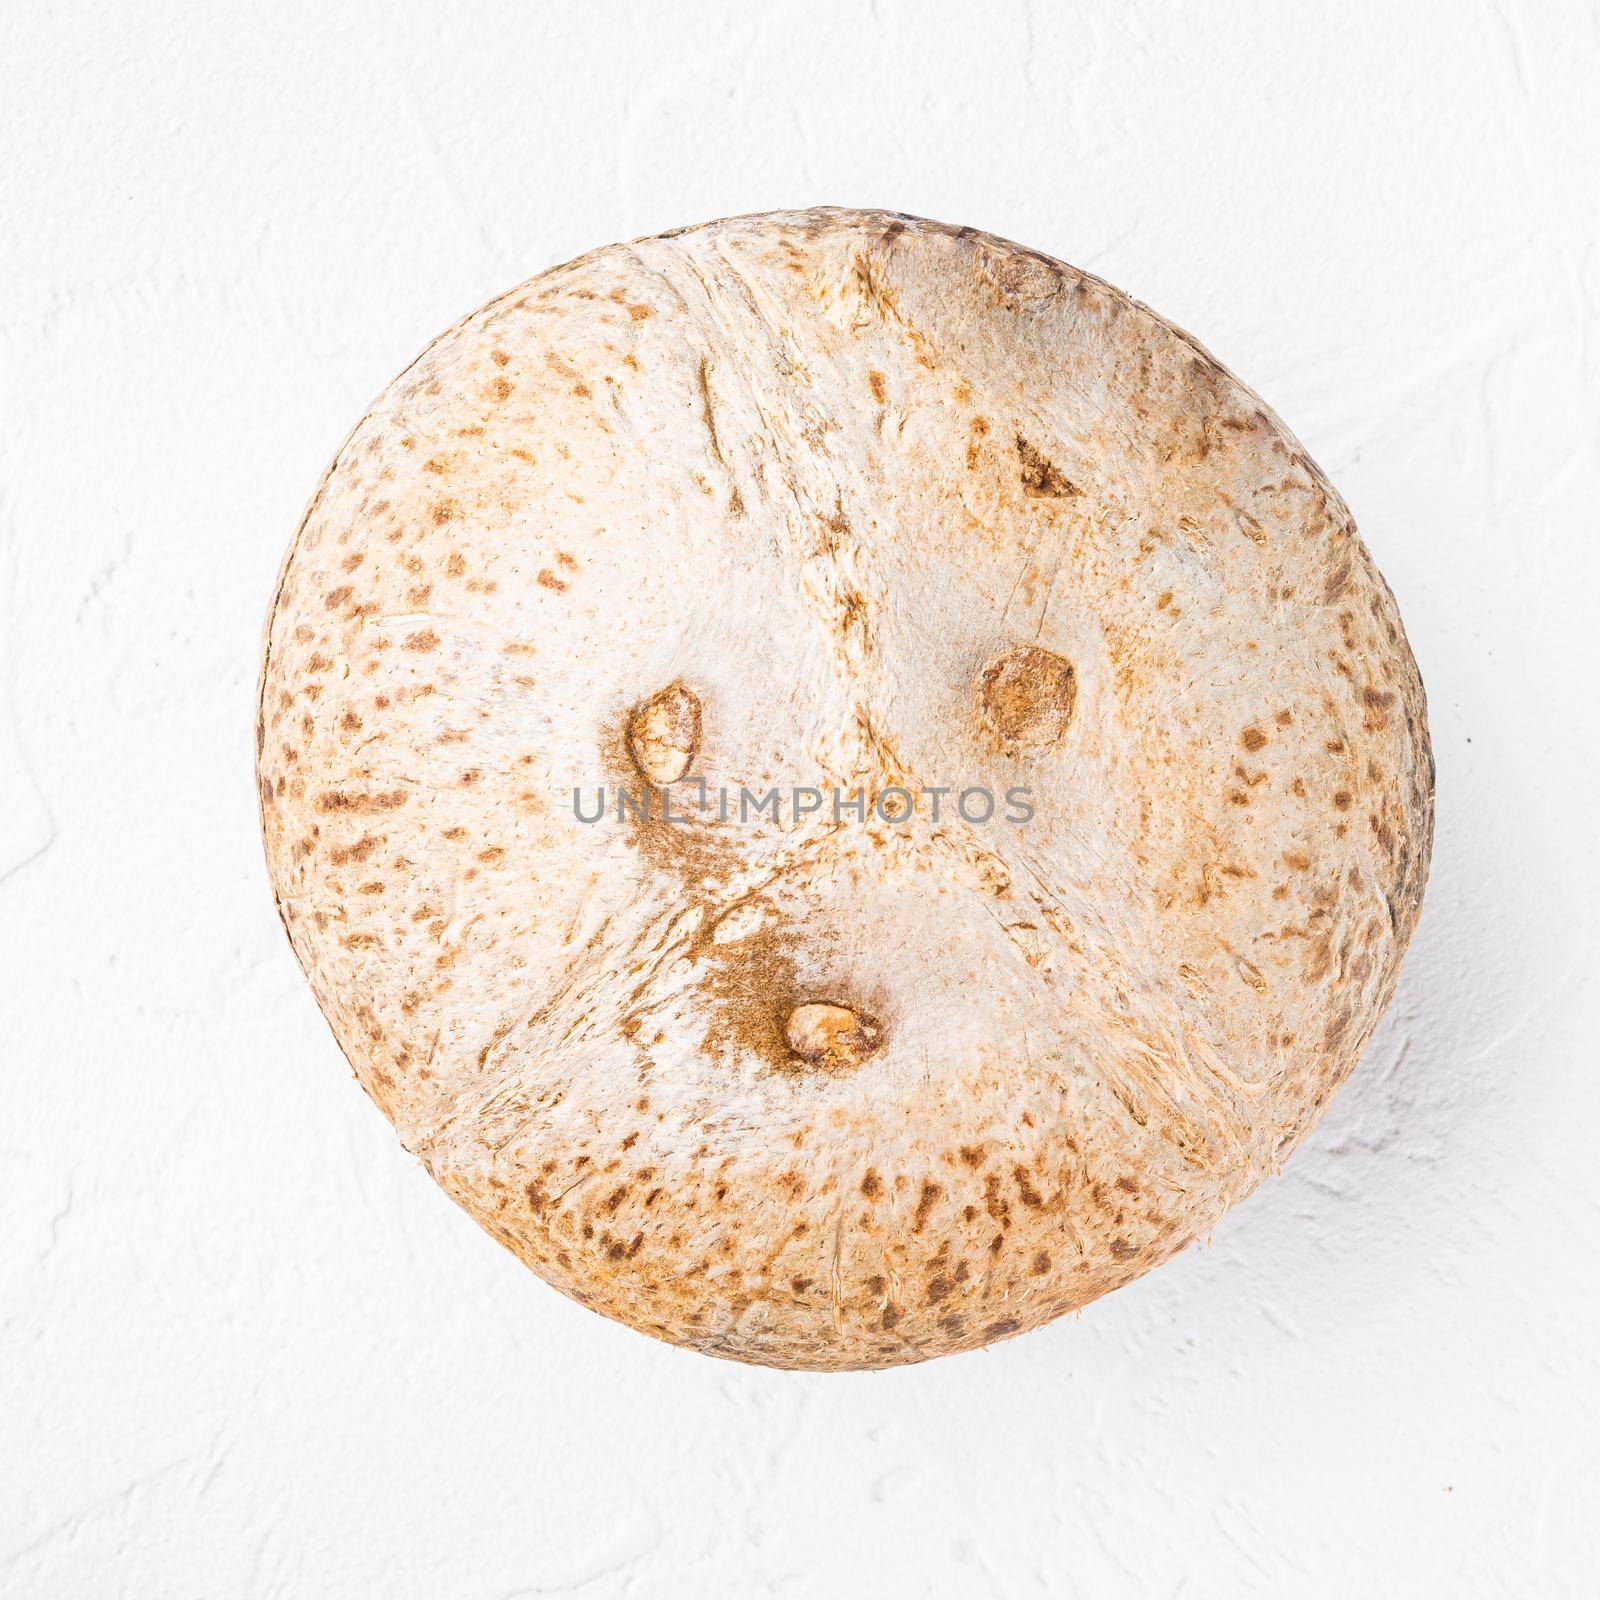 Whole ripe fresh Coconut, on white stone table background, top view flat lay by Ilianesolenyi